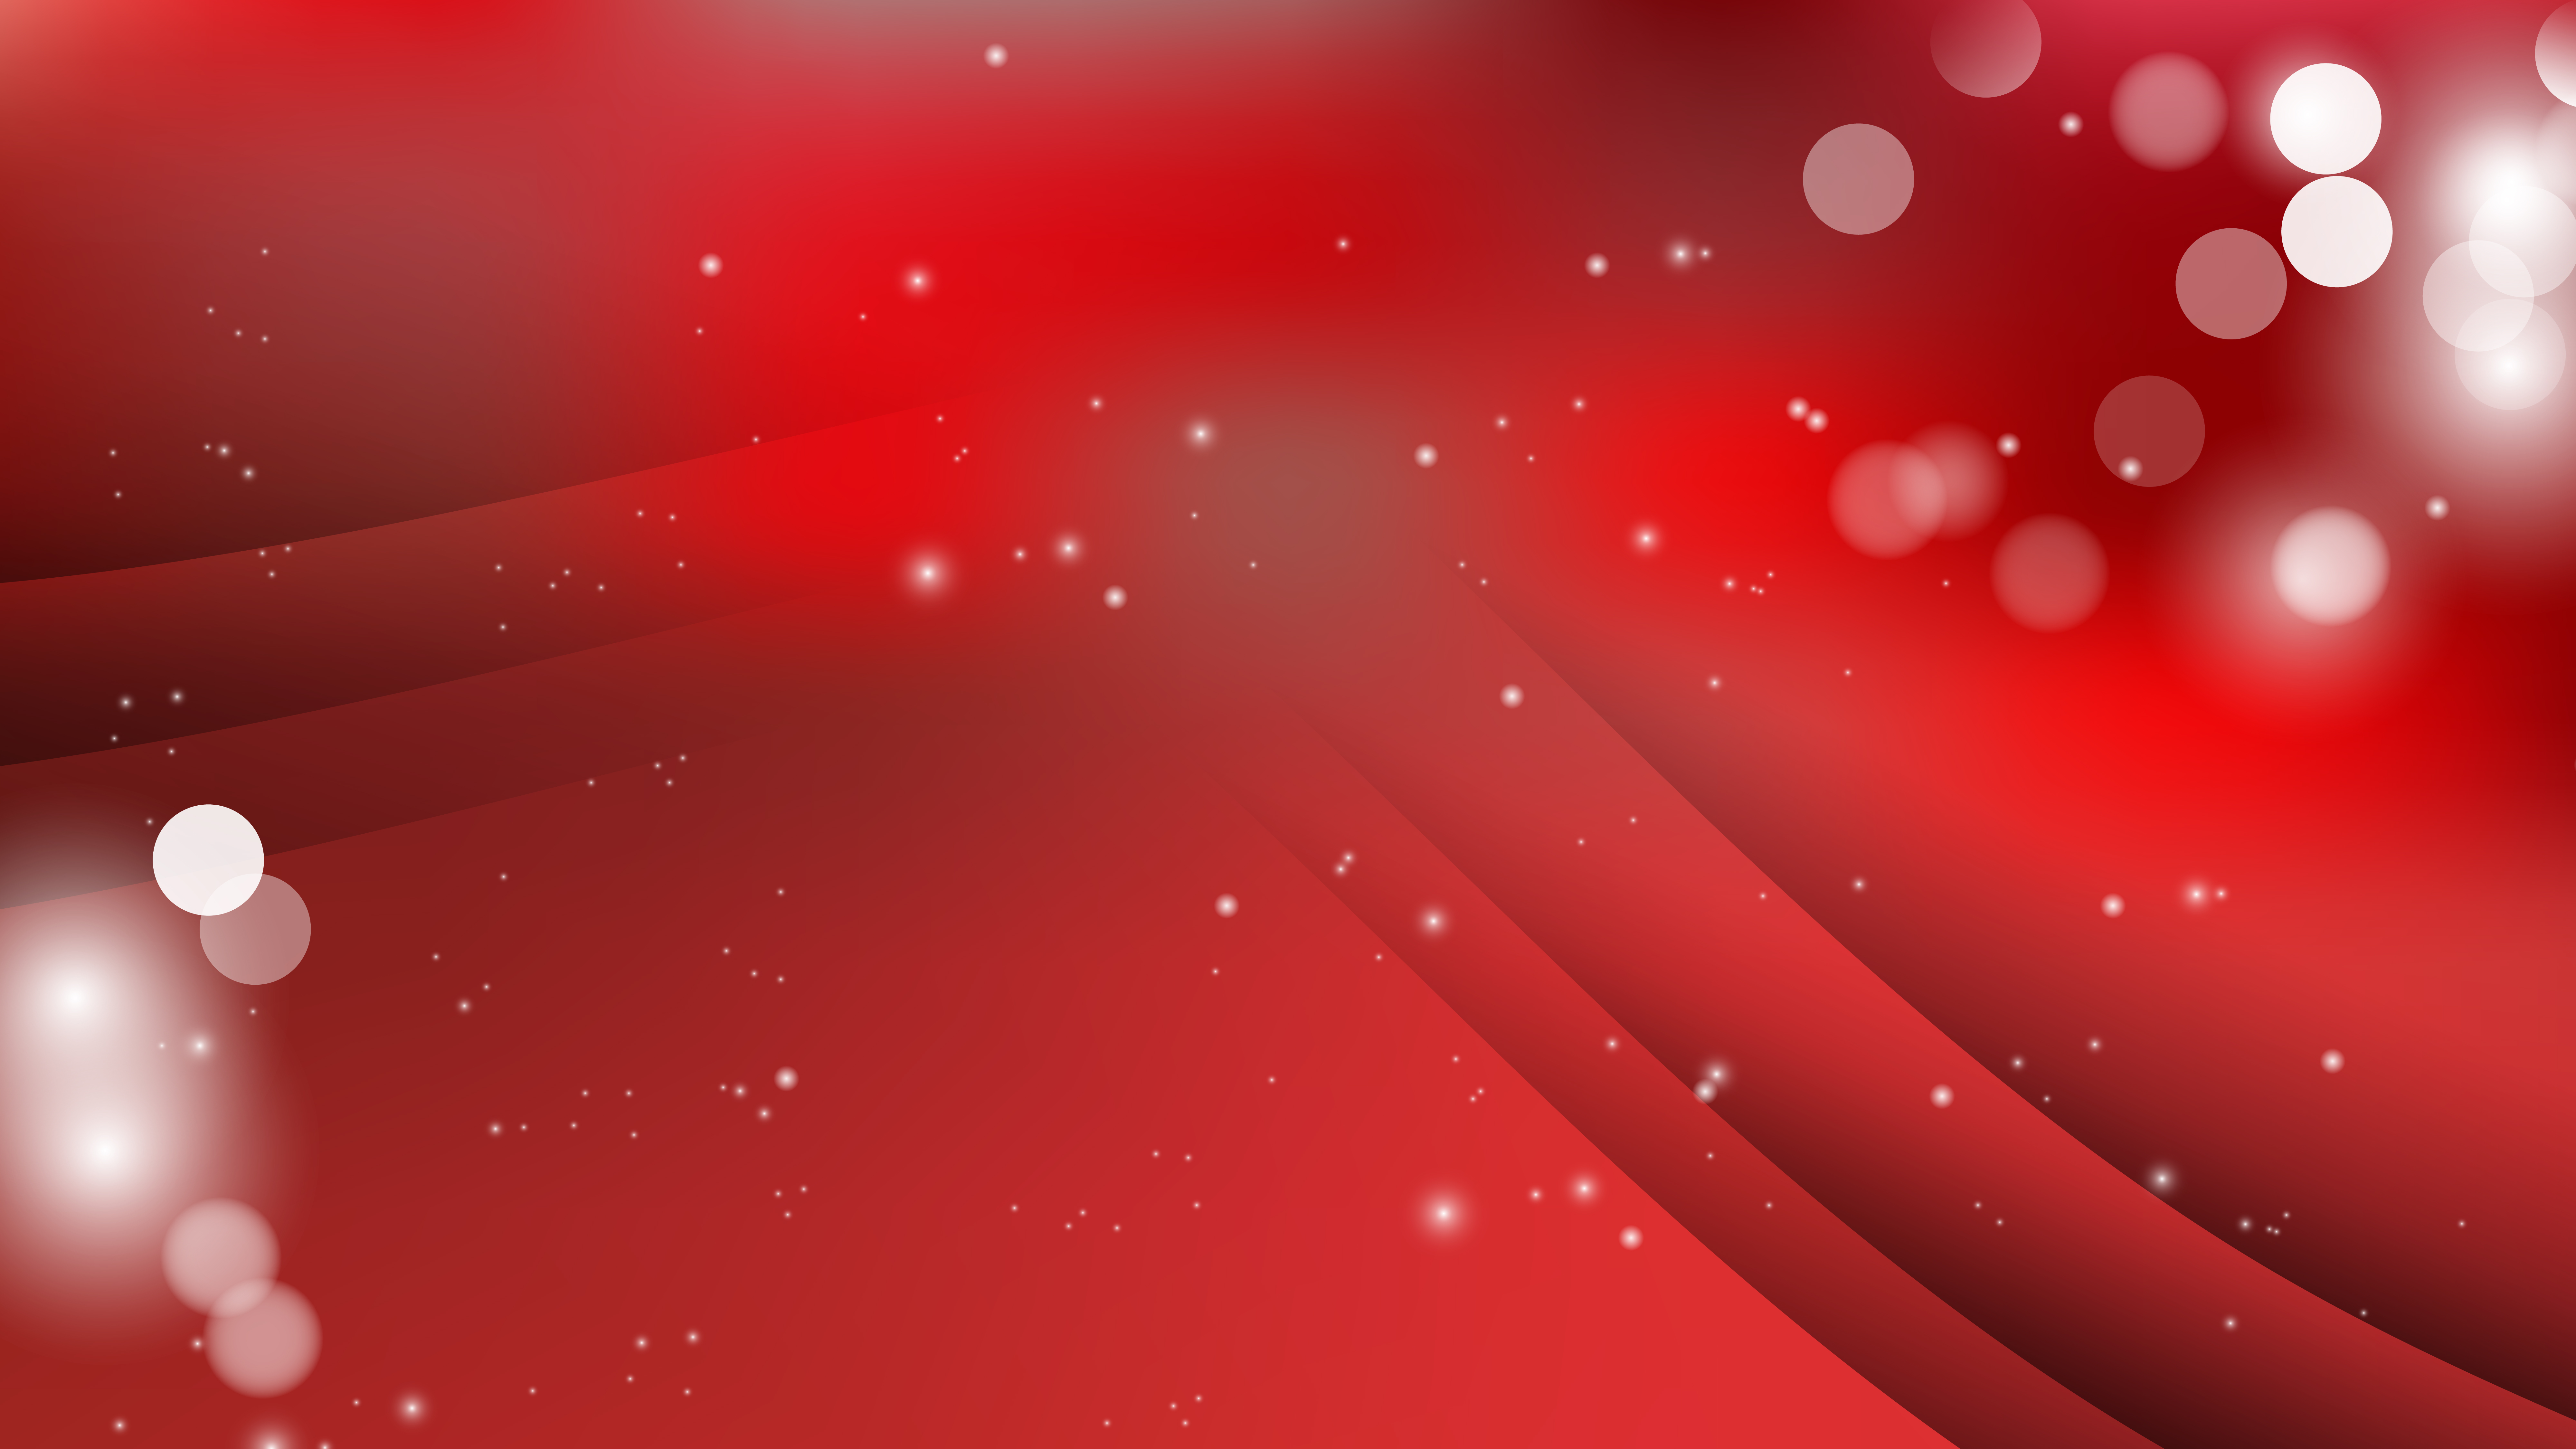 Free Dark Red Abstract Background Image